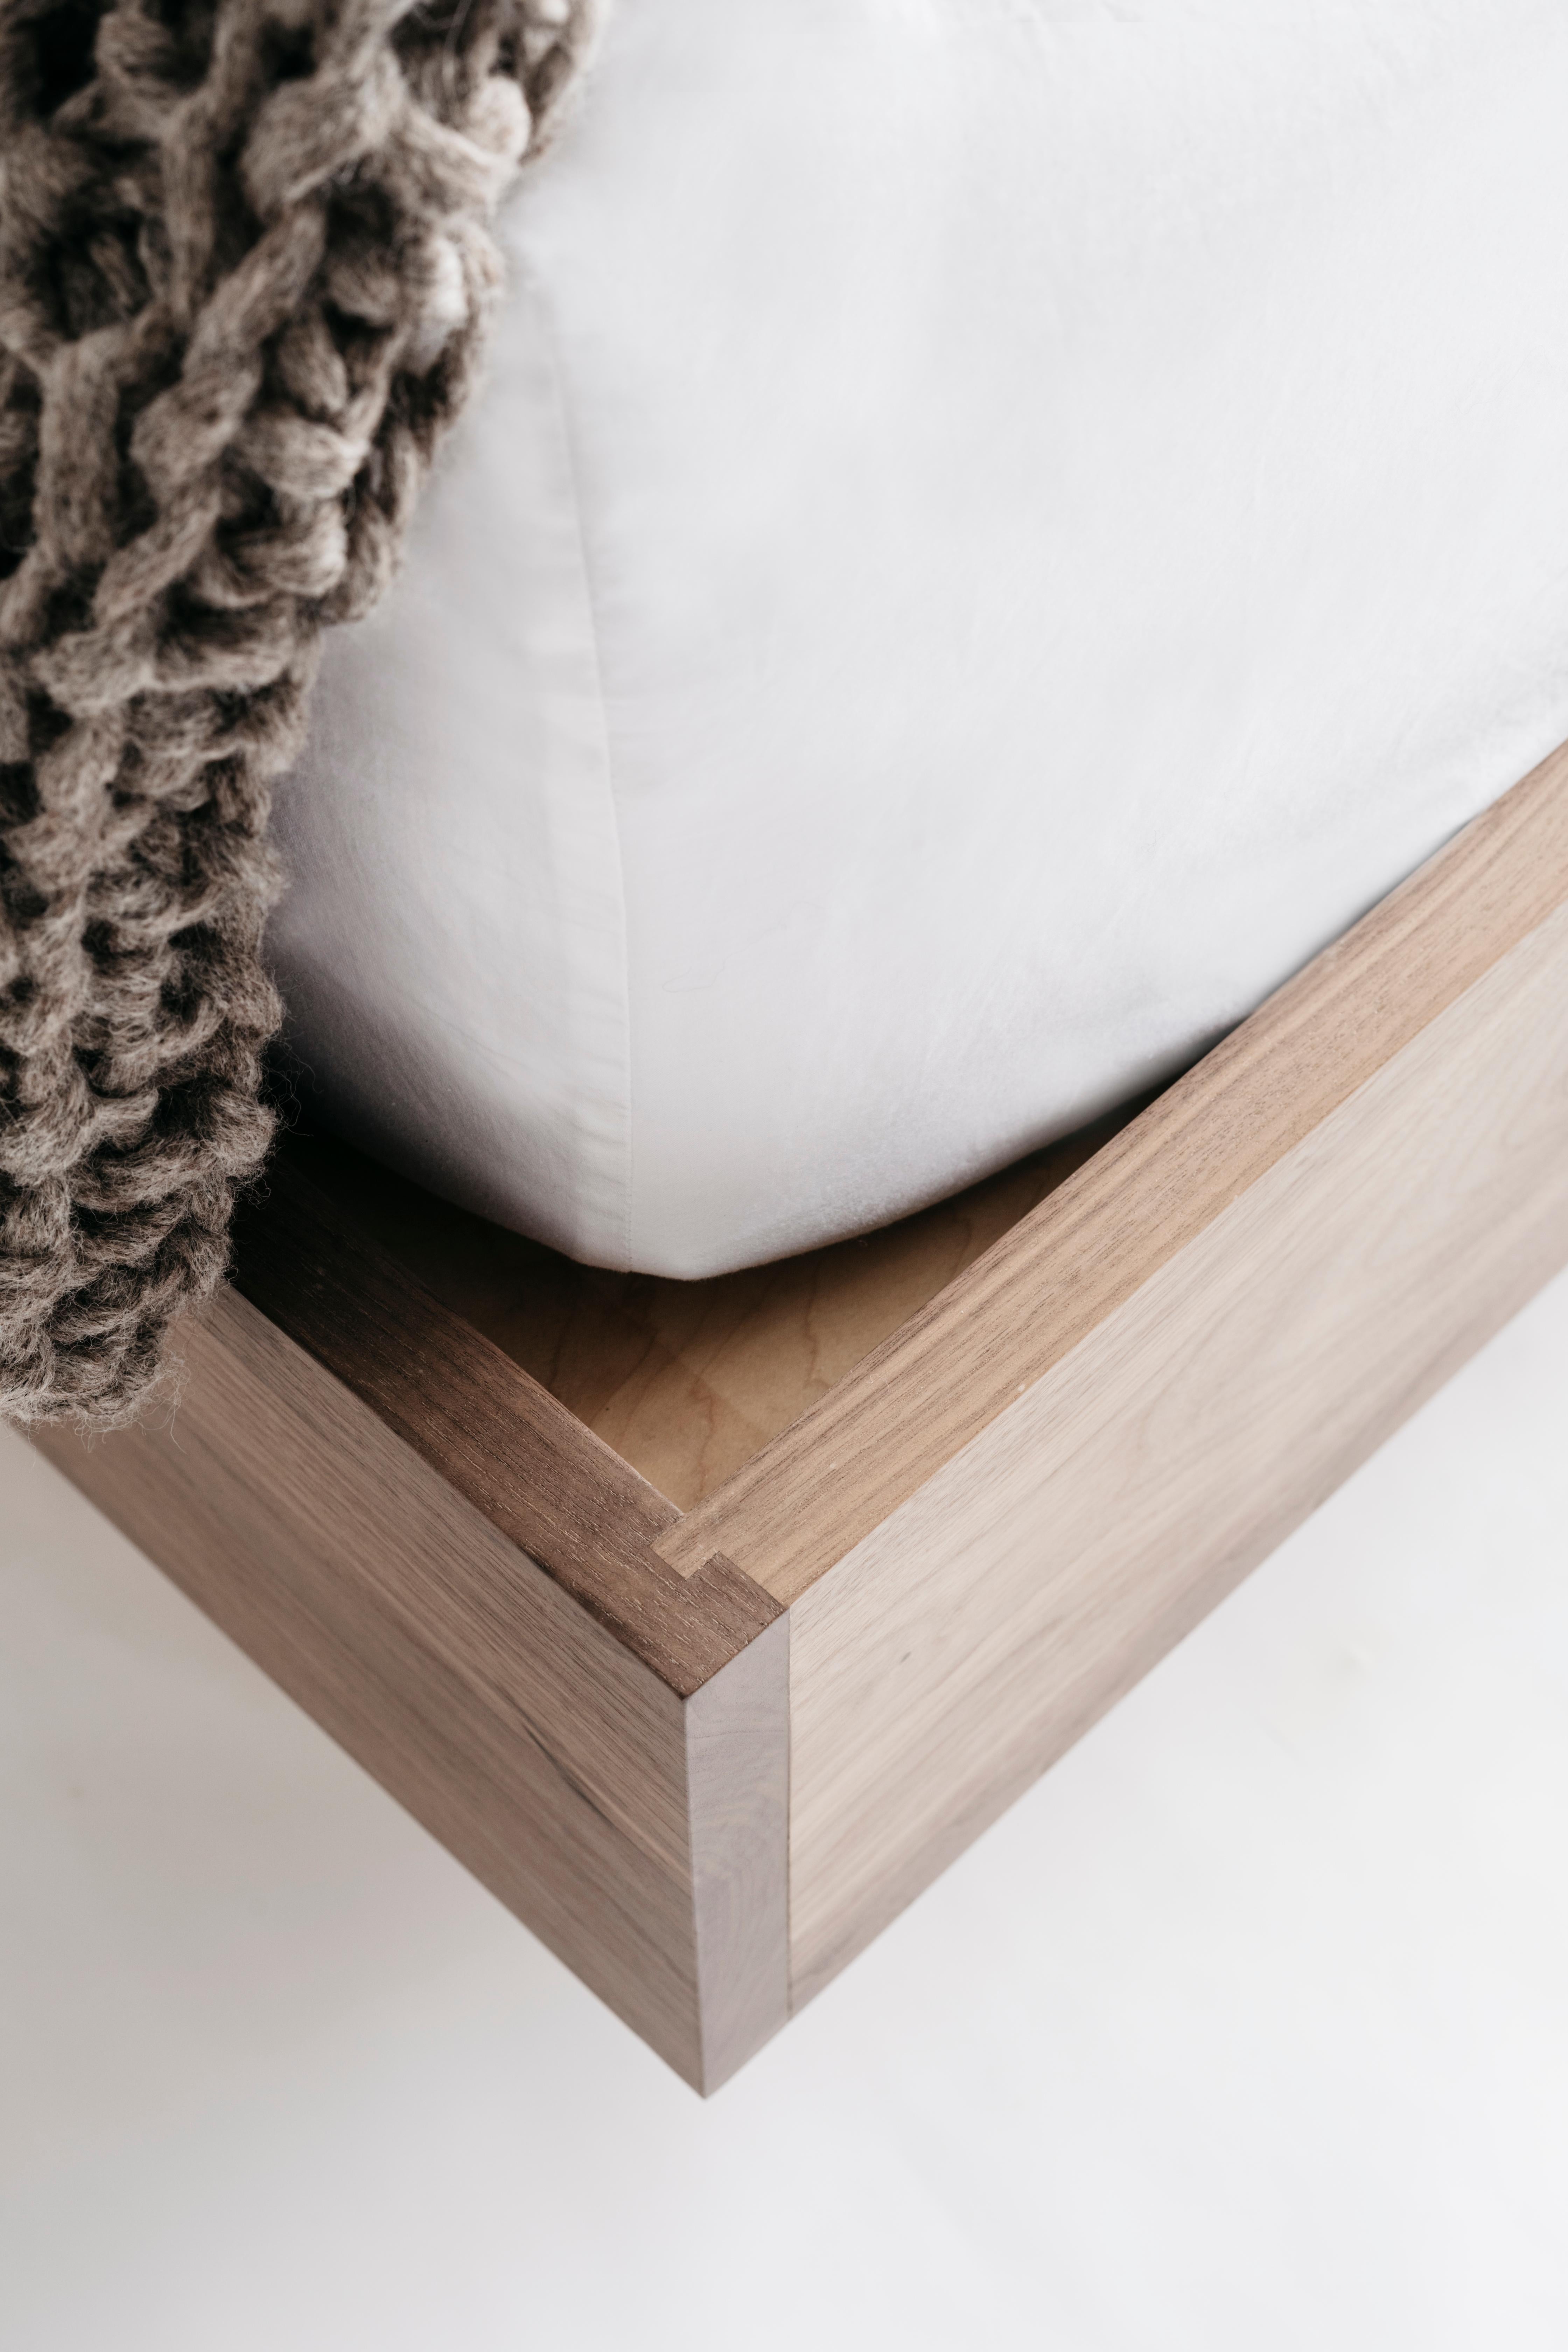 The Keepsake bed is handcrafted with discrete drawers and shelves that fit into the sides of the headboard like wooden puzzle pieces. The push-release doors and drawers open with ease and are thoughtfully dimensioned to hold small bedside items and